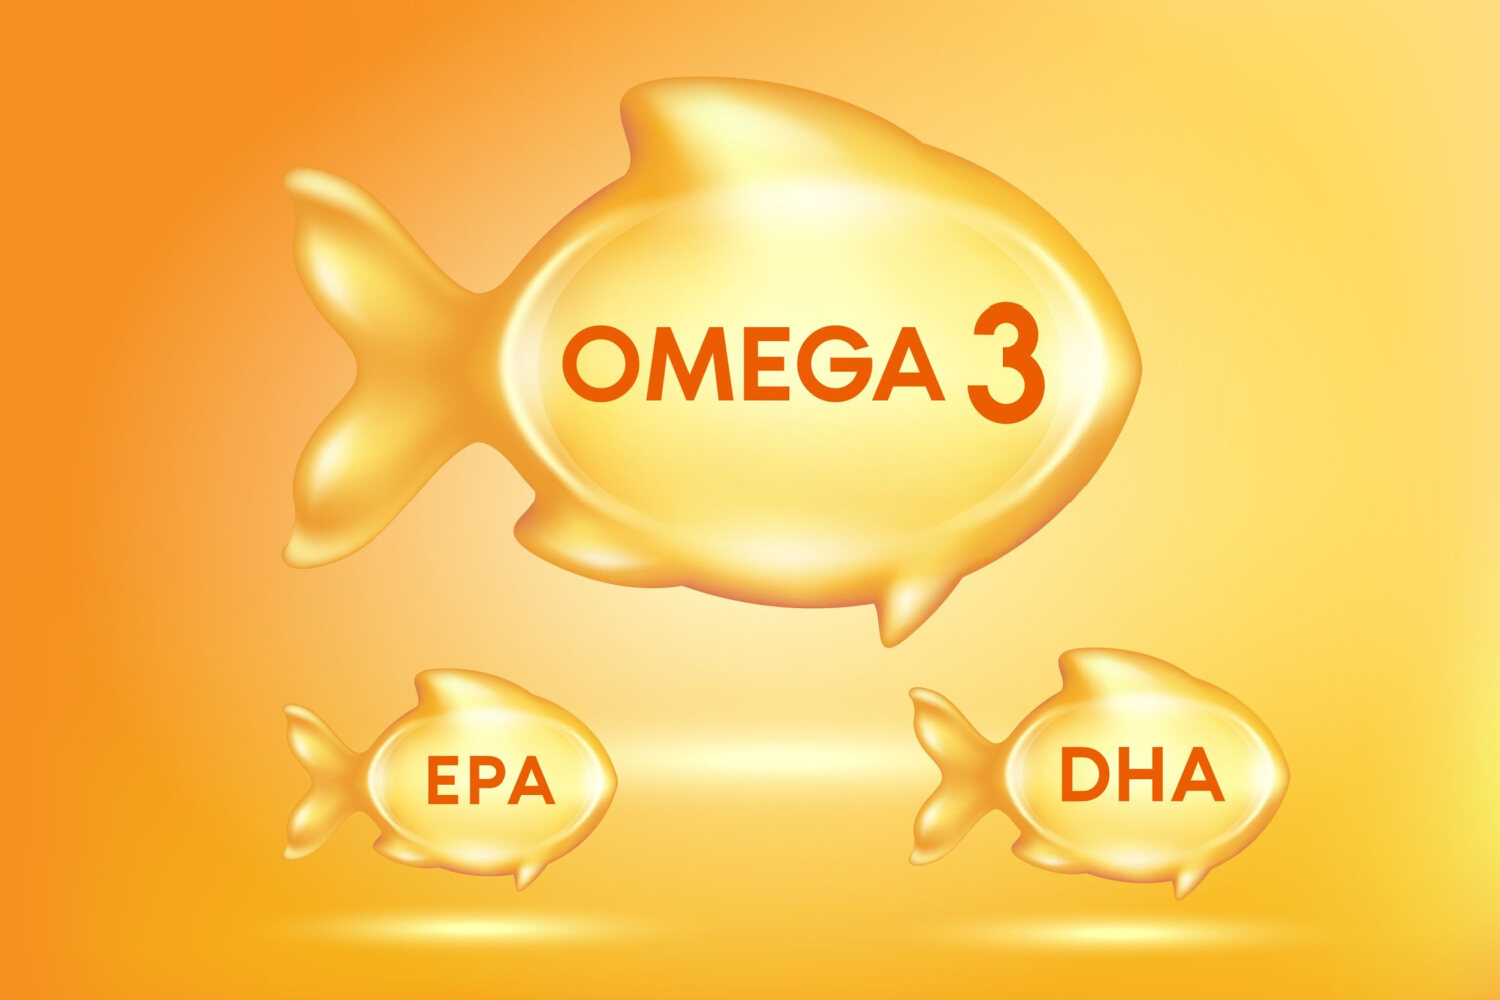 Omega-3 fatty acids help in proper functioning of the body